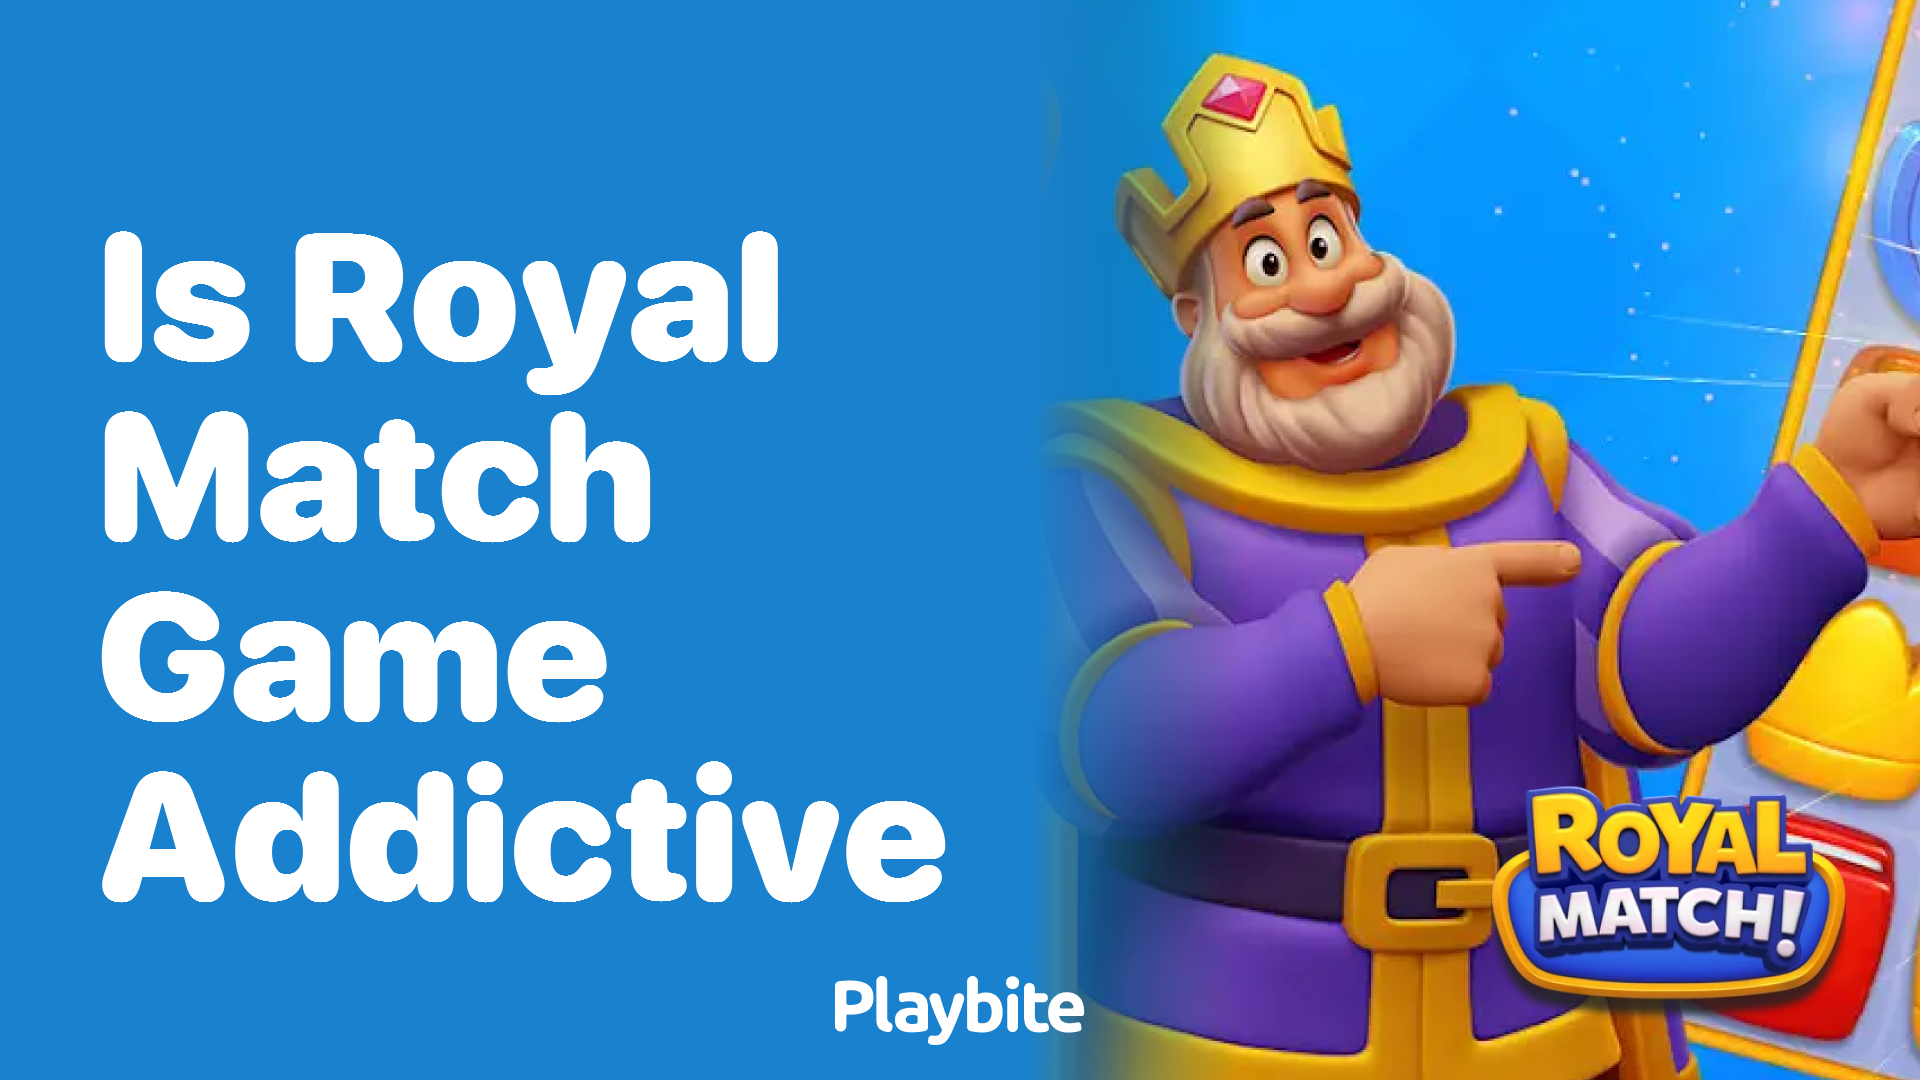 Is The Royal Match Game Addictive? Find Out Here!